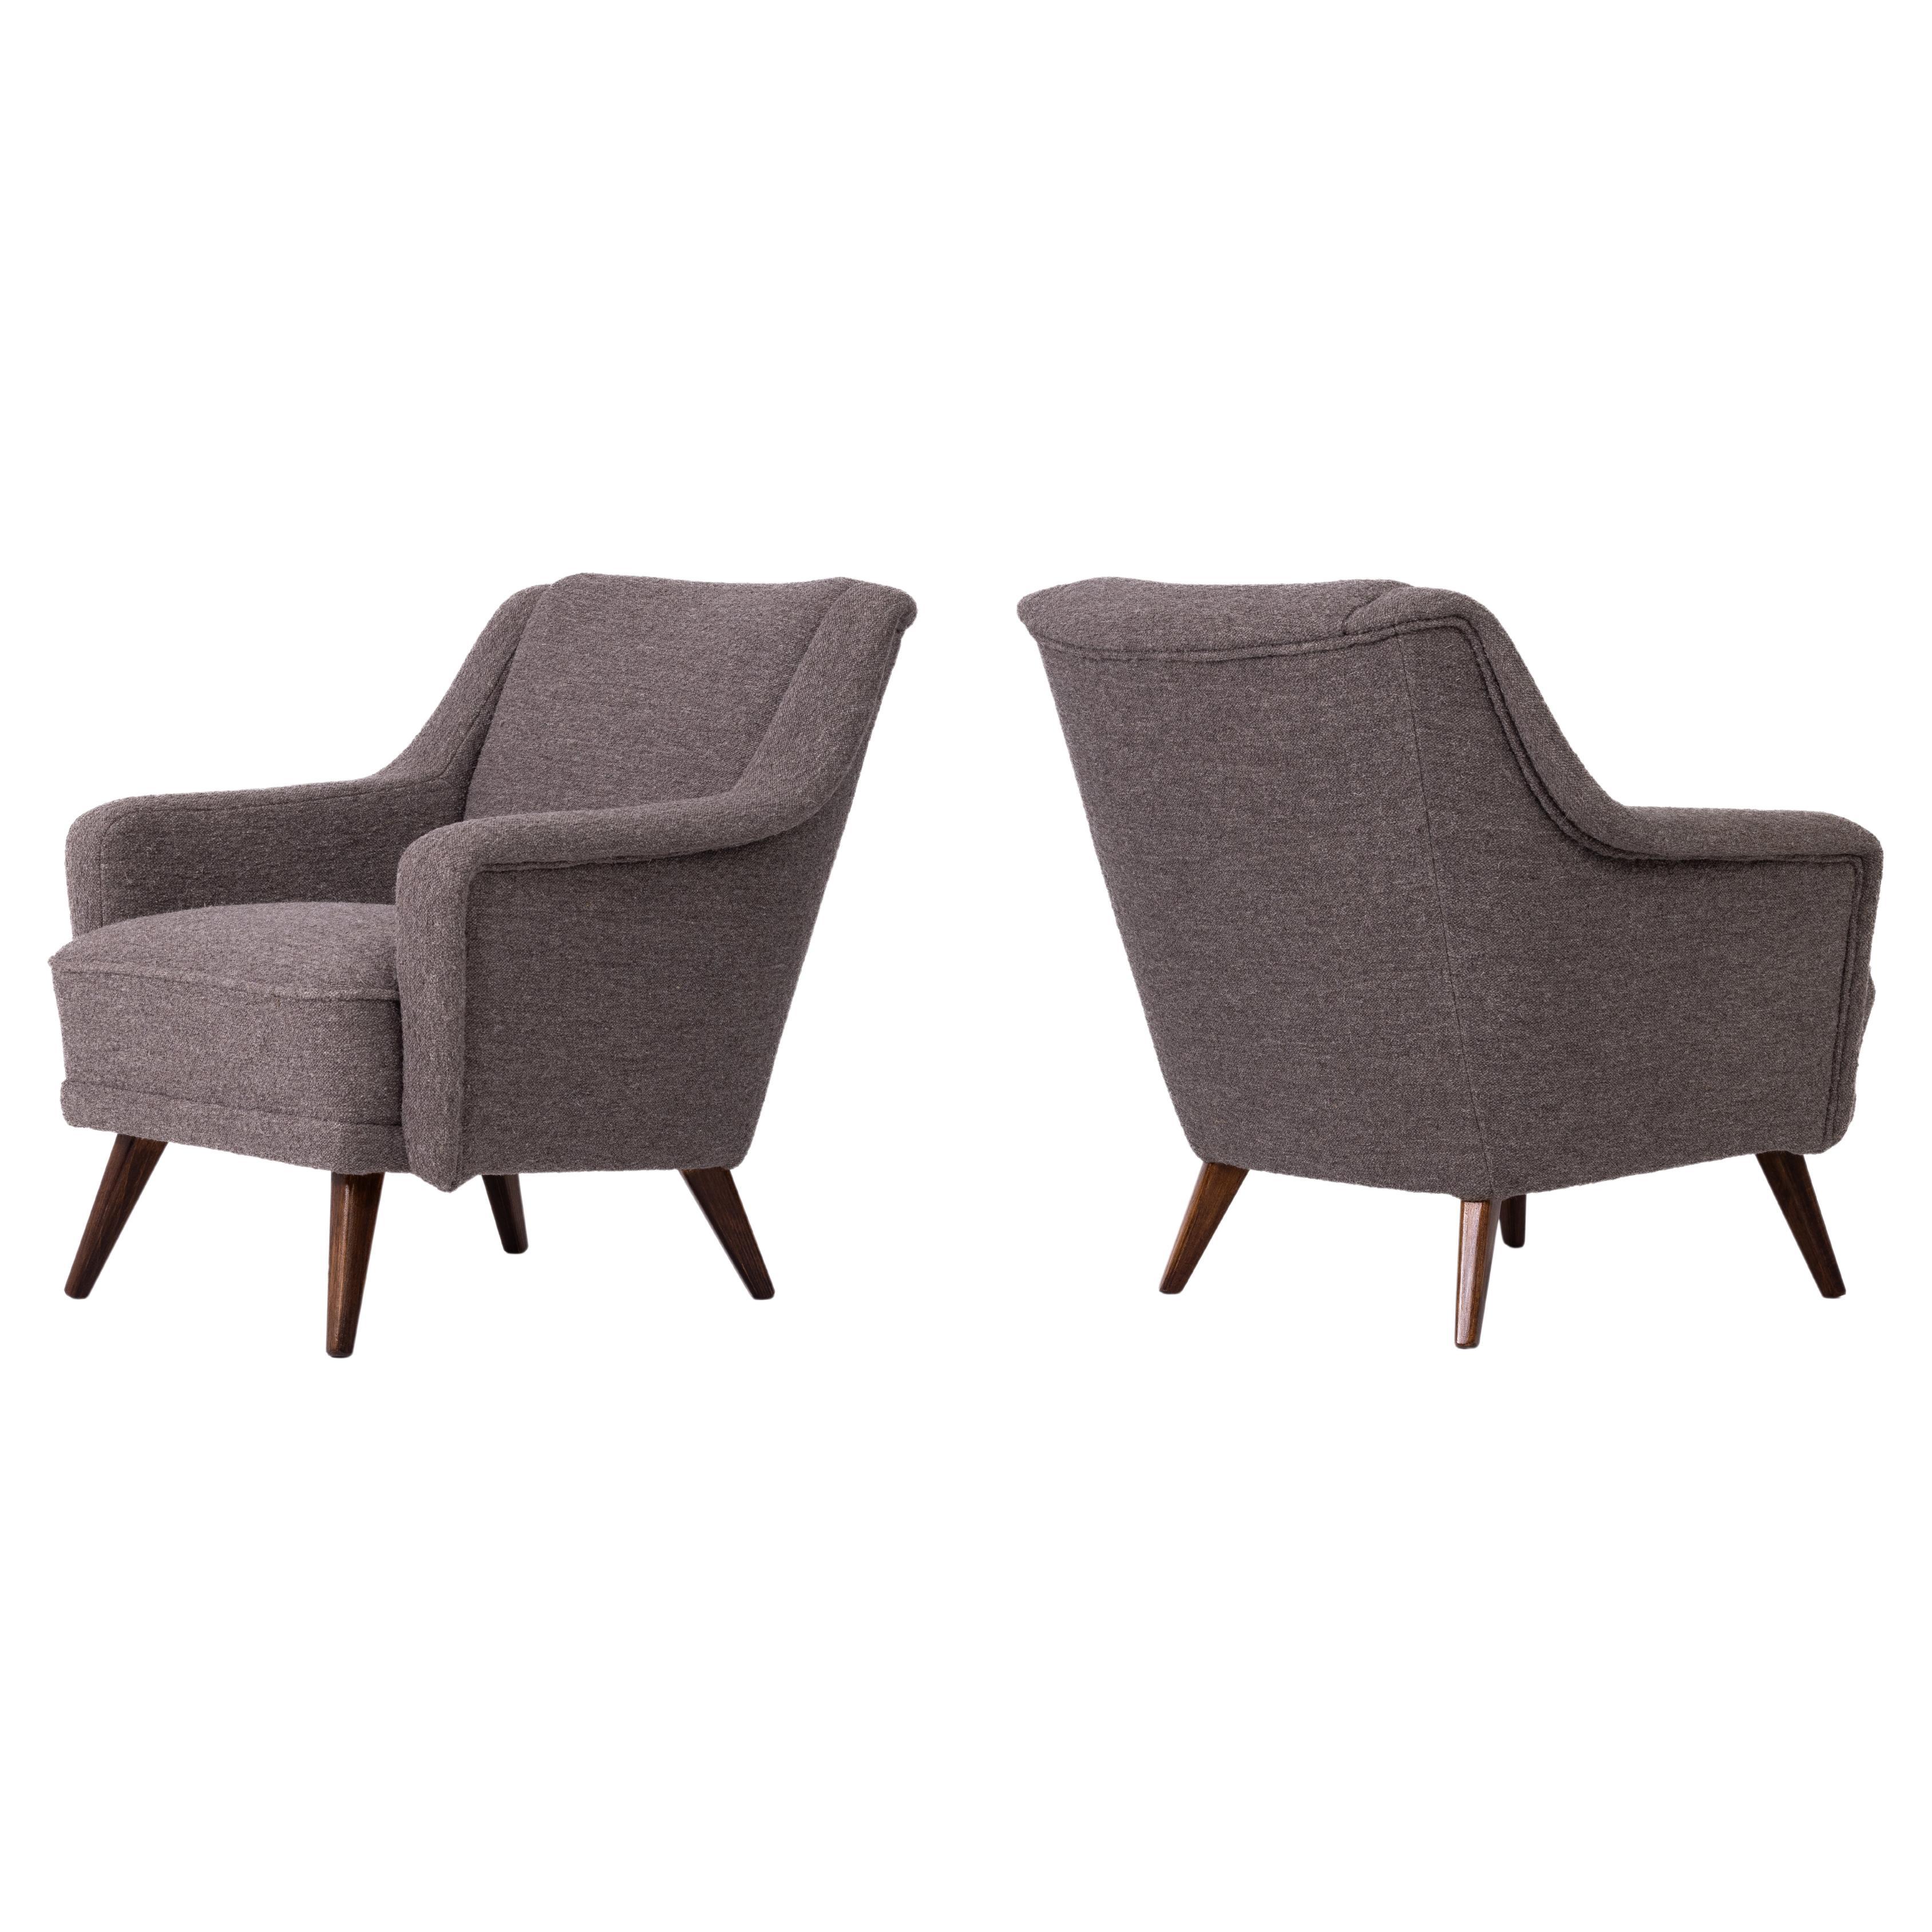 Mid-Century Modern Pair of Mid-century armchairs, Austria 1950s, Newly Reupholstered, Linen Fabric For Sale